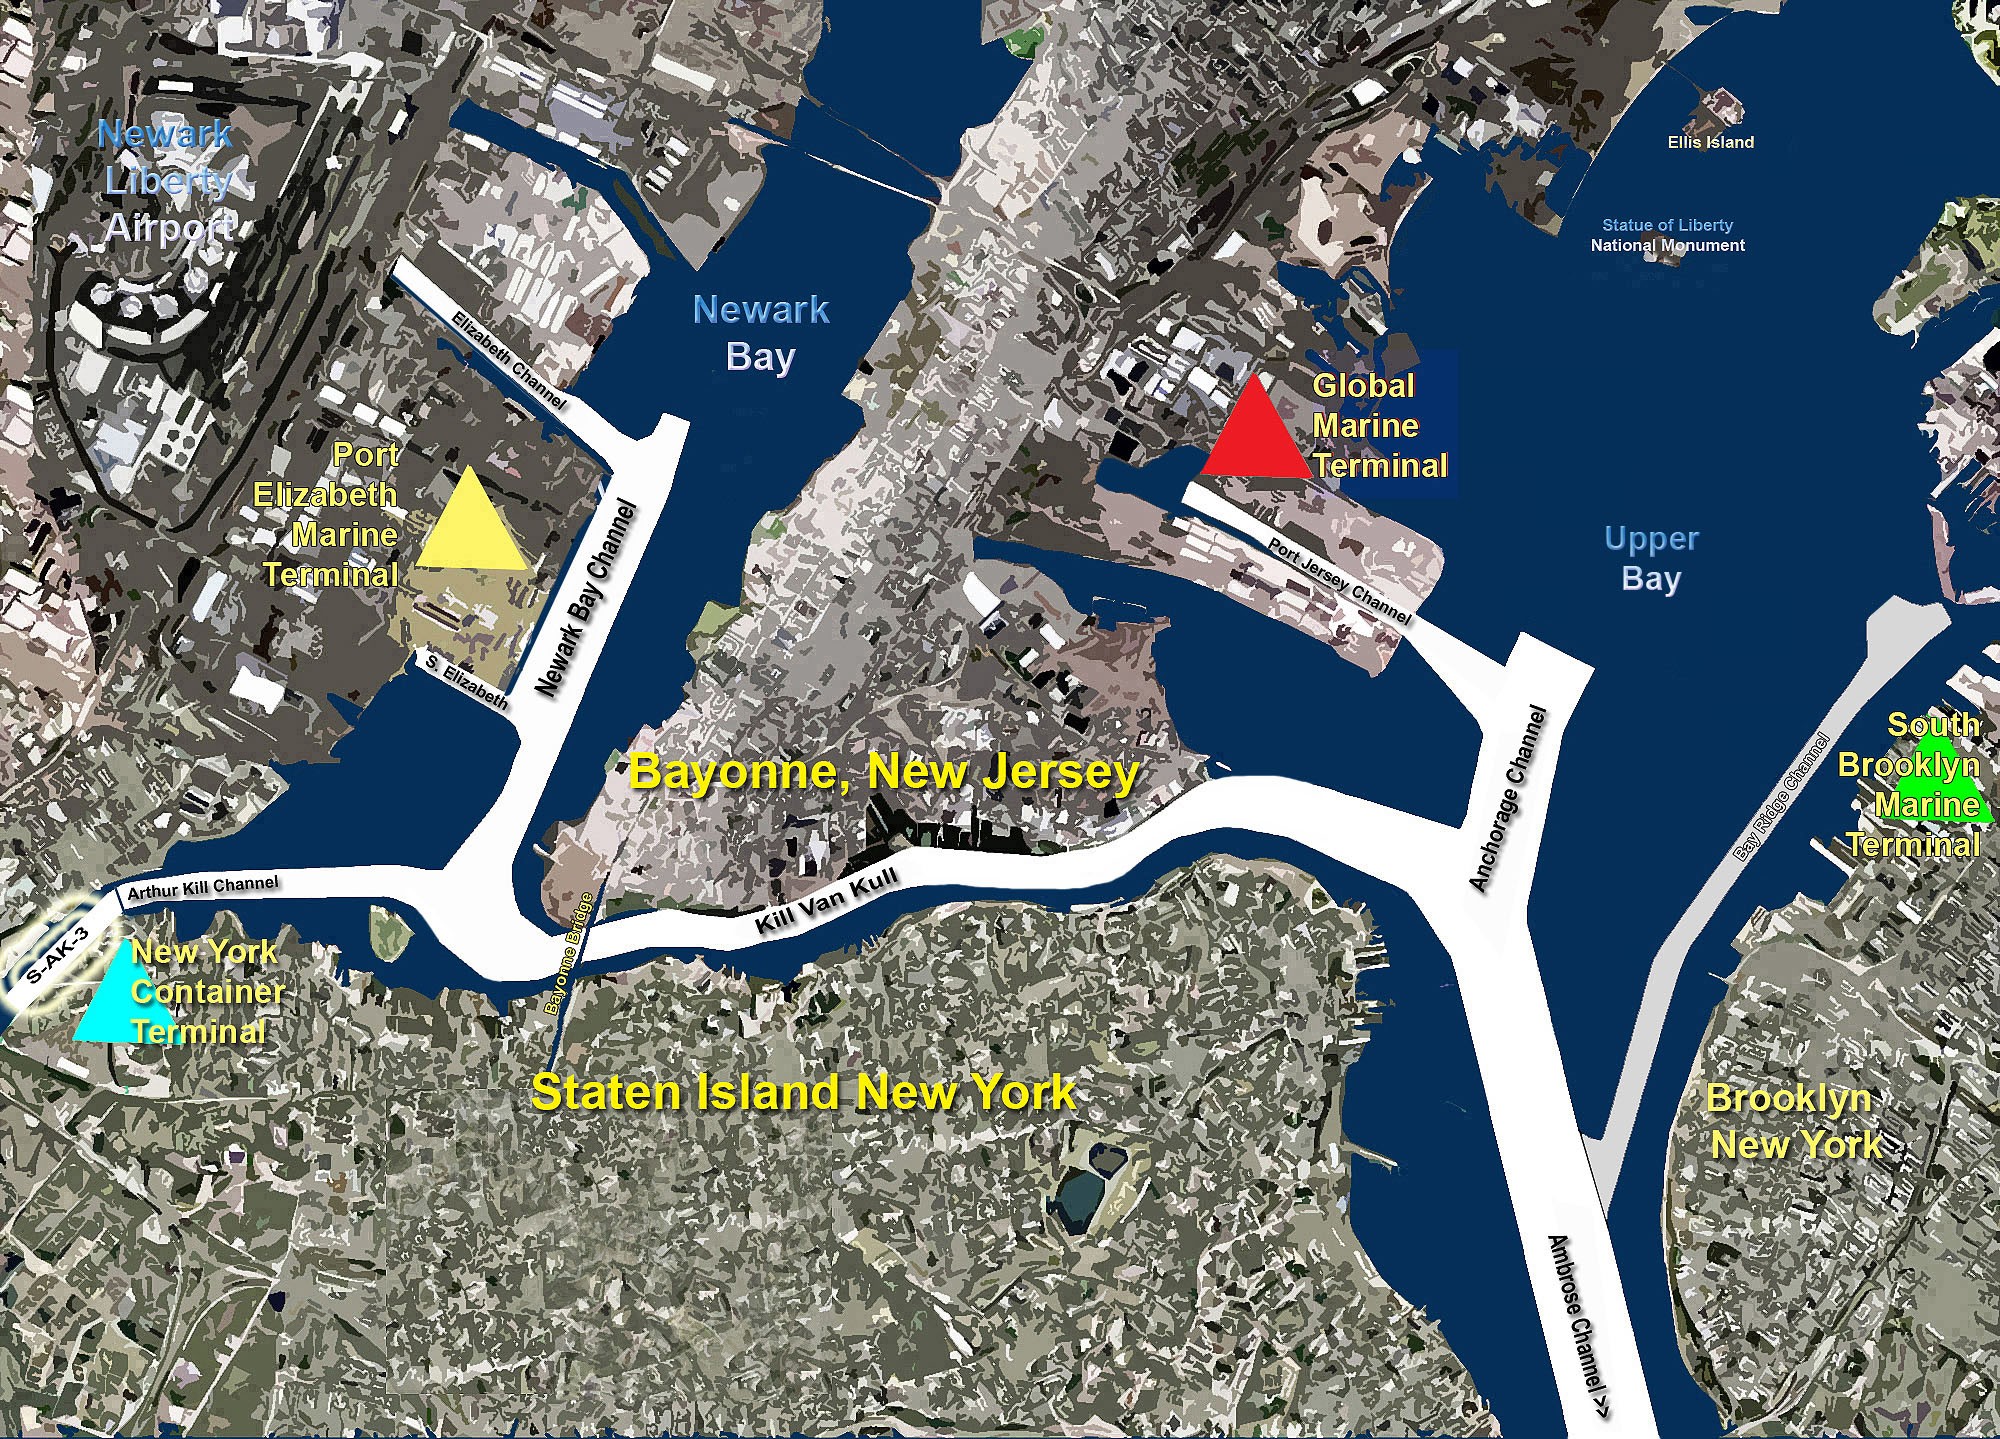 Map of Staten Island and northern New Jersey showing navigation channels